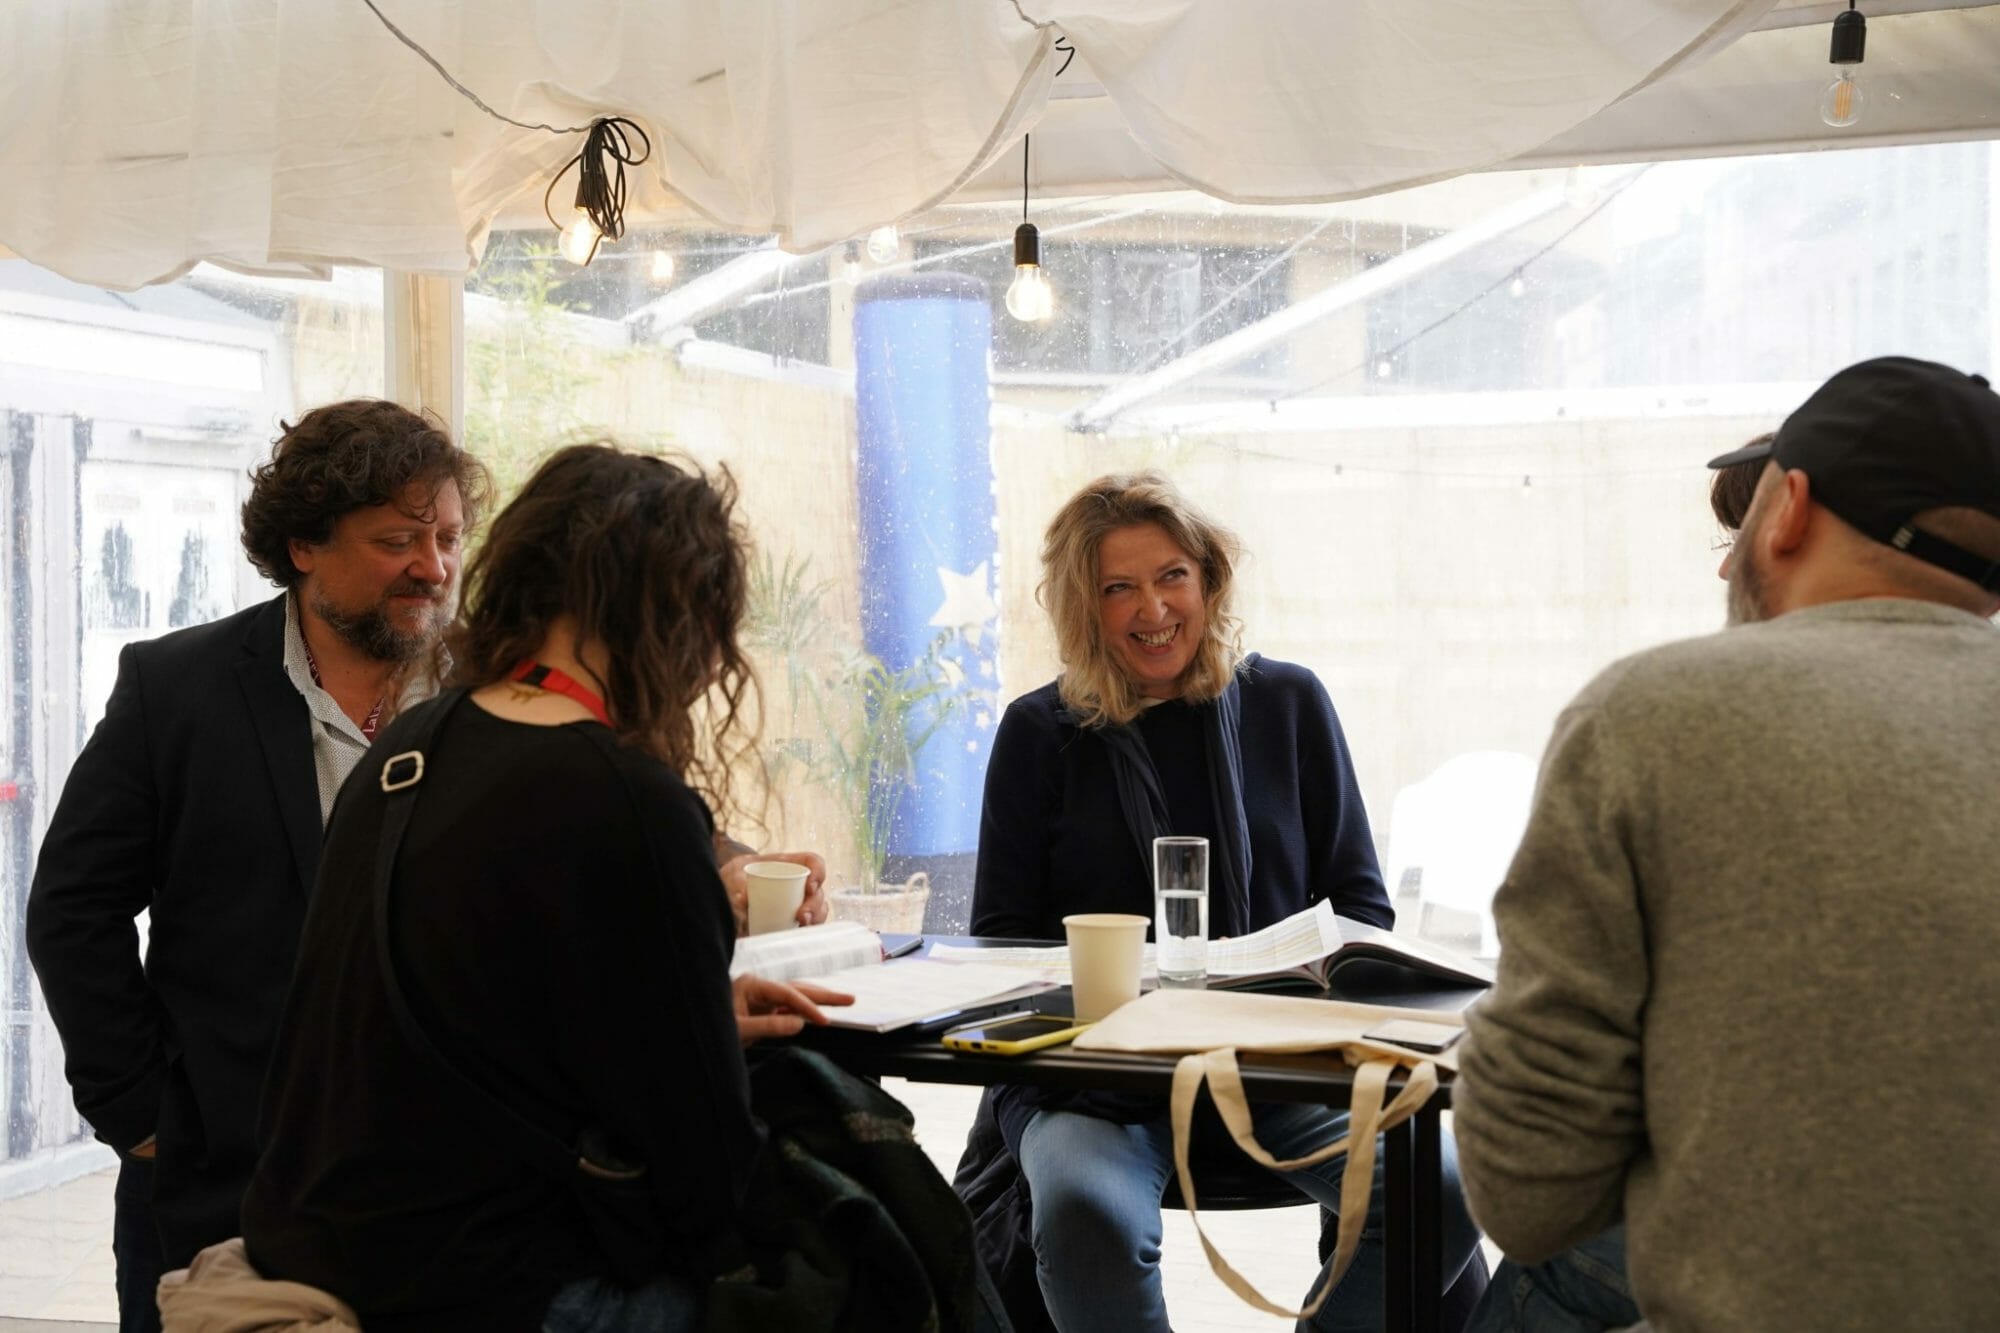 Day 10 - 29.04.2022 - Jury Deliberation | Pascal Hologne (General and Artistic Direction), Sibille Maujean (Guests), Next Competition Jury Bea Catteeuw, Christelle Mahy & Sebastien Petit 